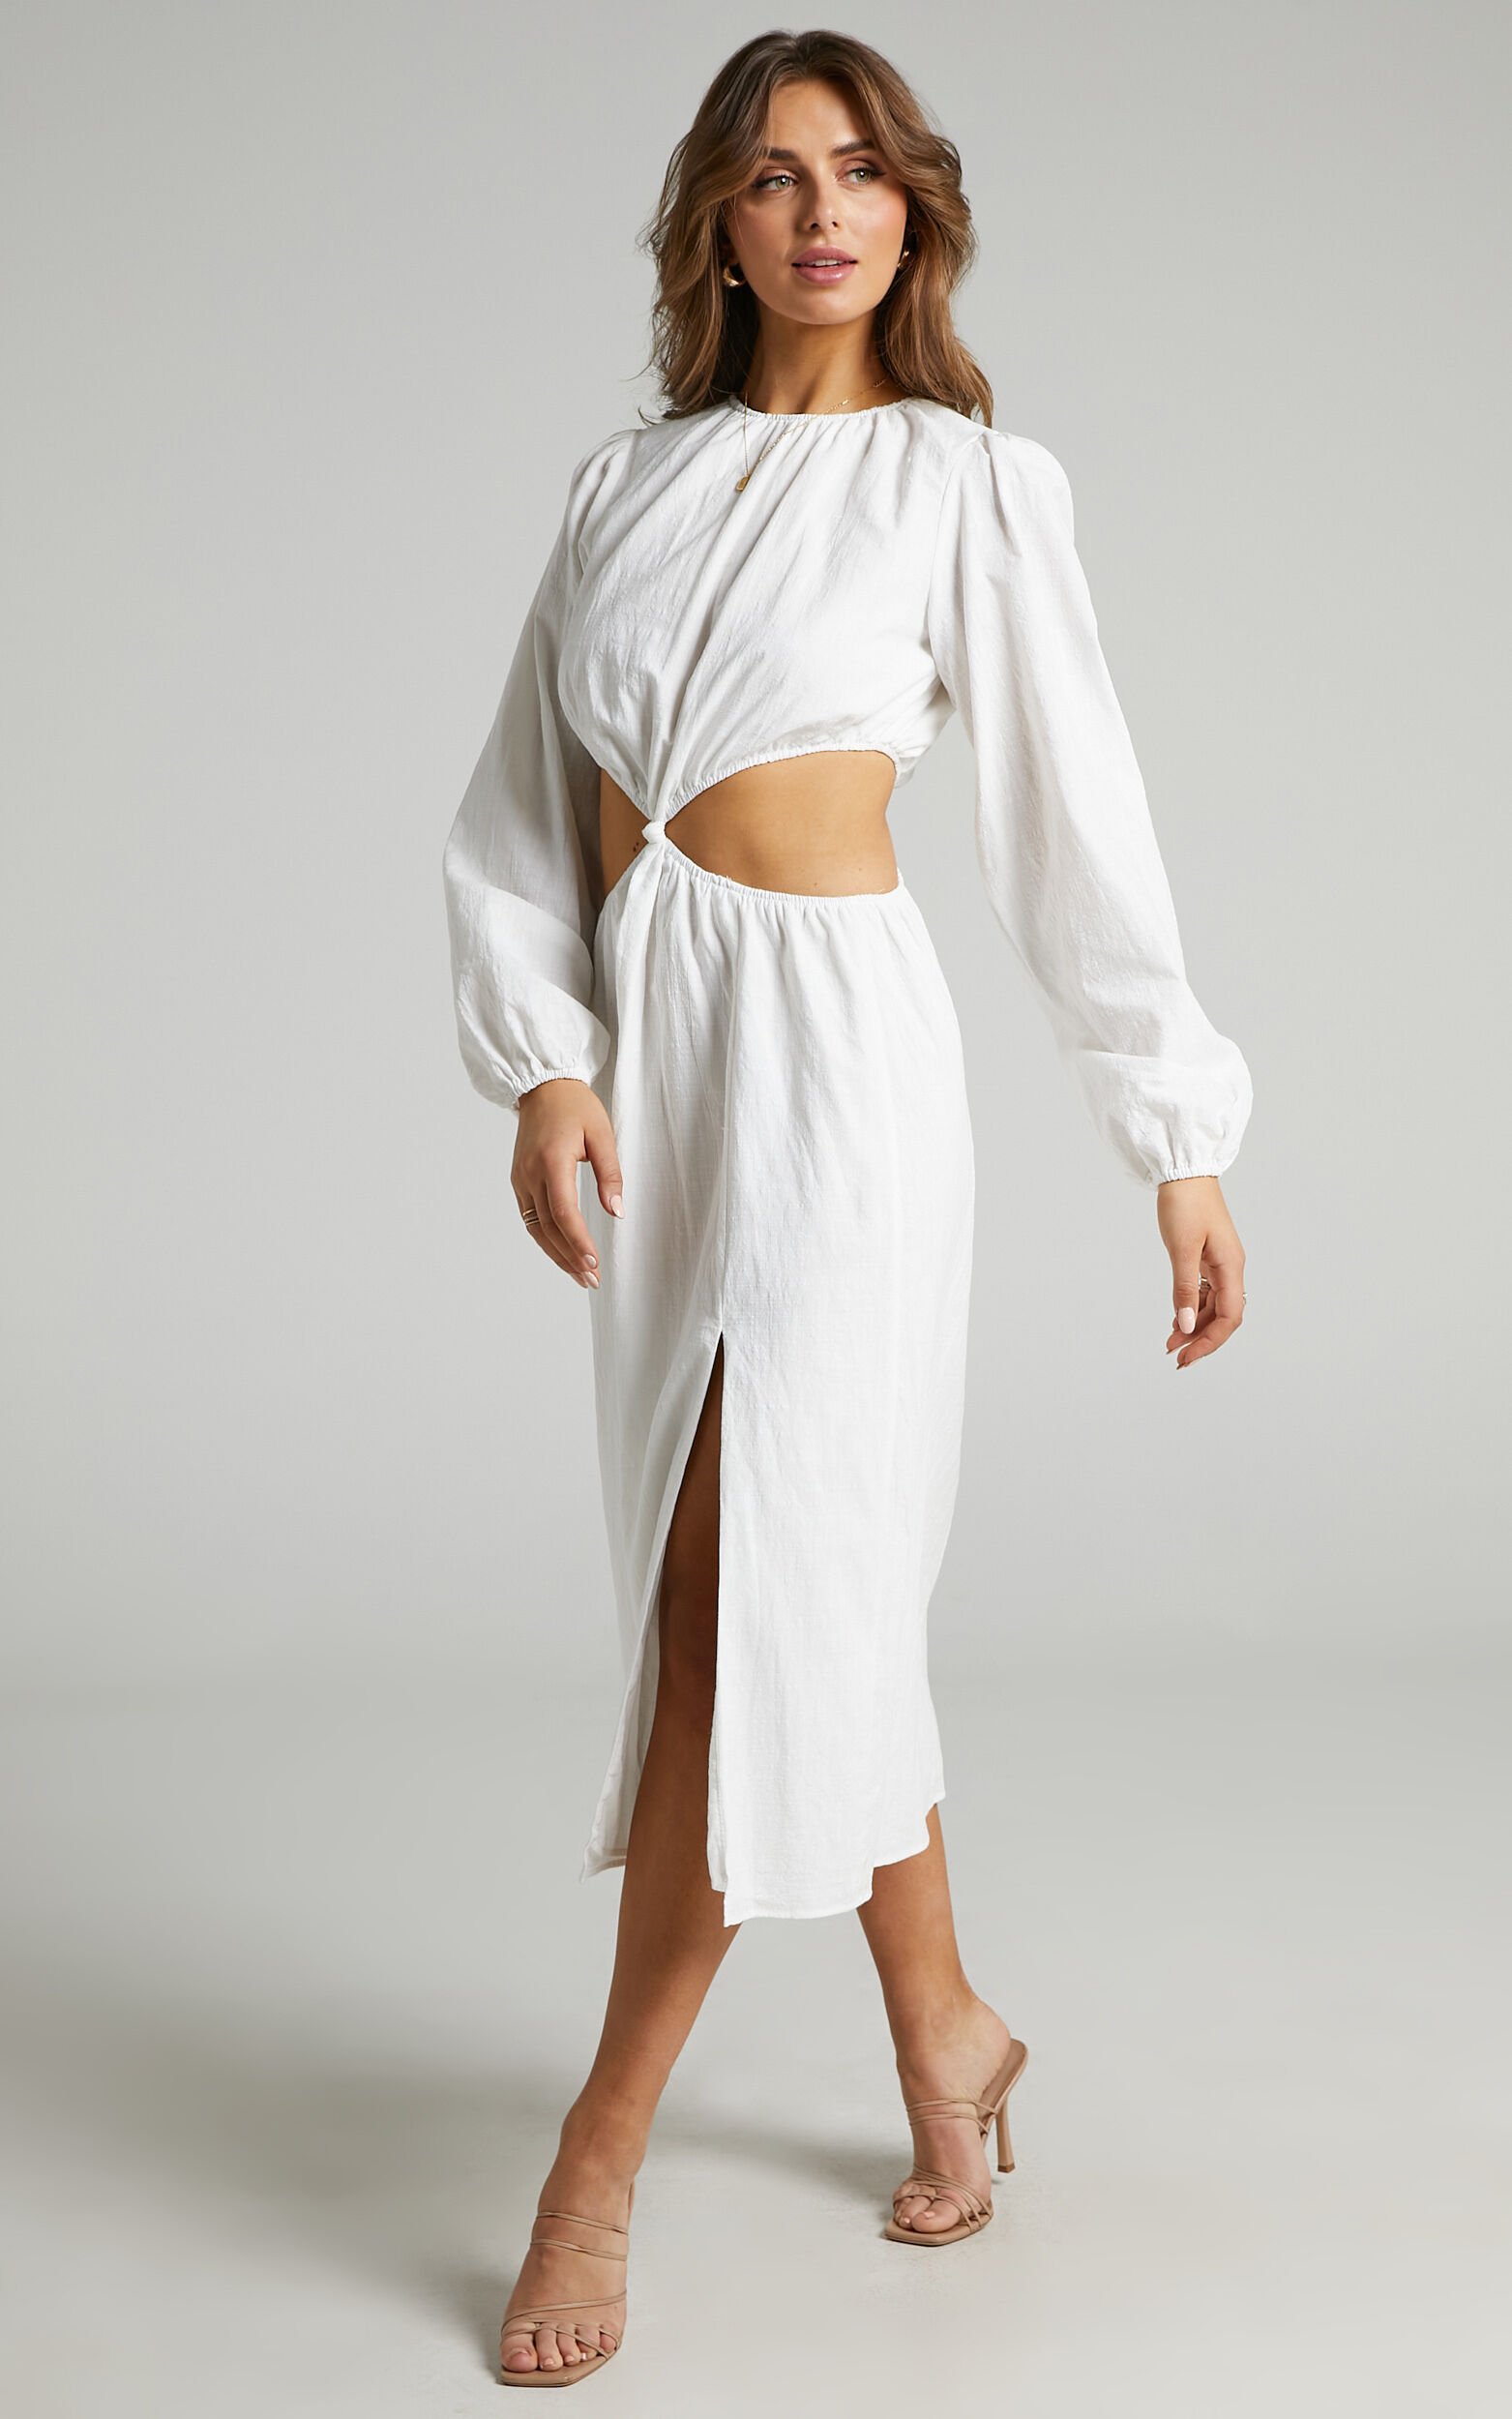 Amera Knot Front Midi Dress in White - 06, WHT1, super-hi-res image number null